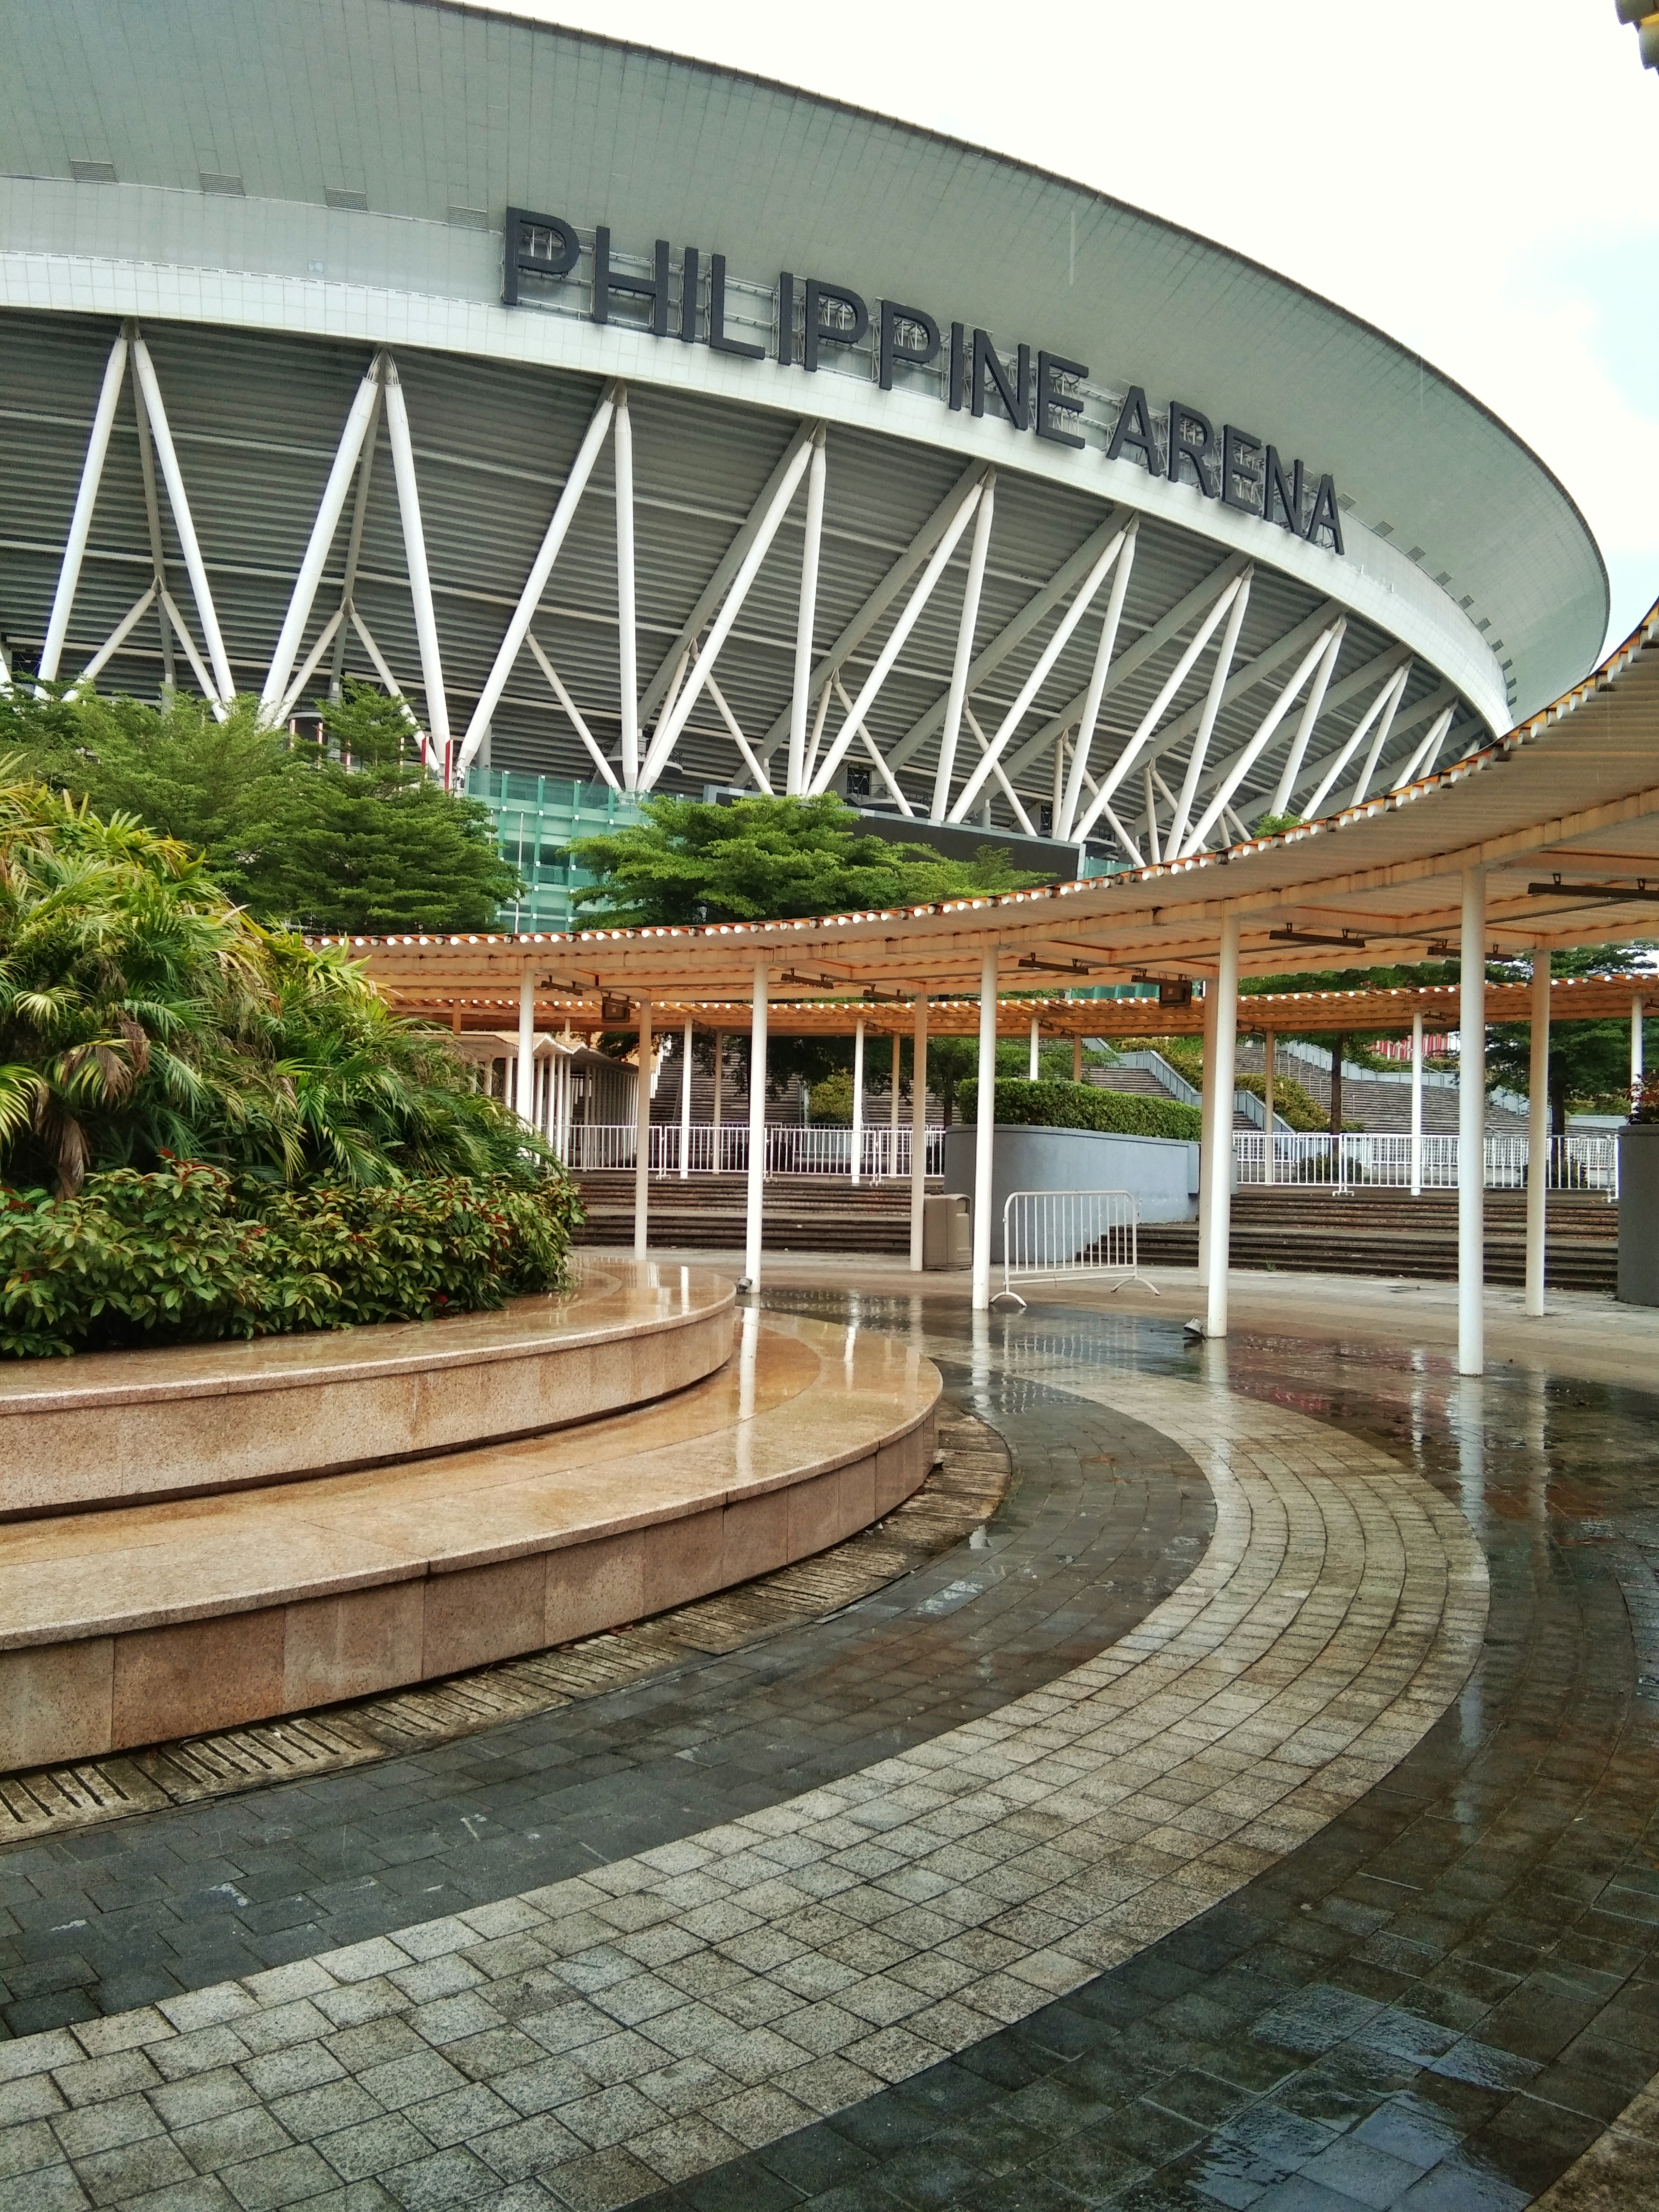 Picture of a place: Philippine Arena